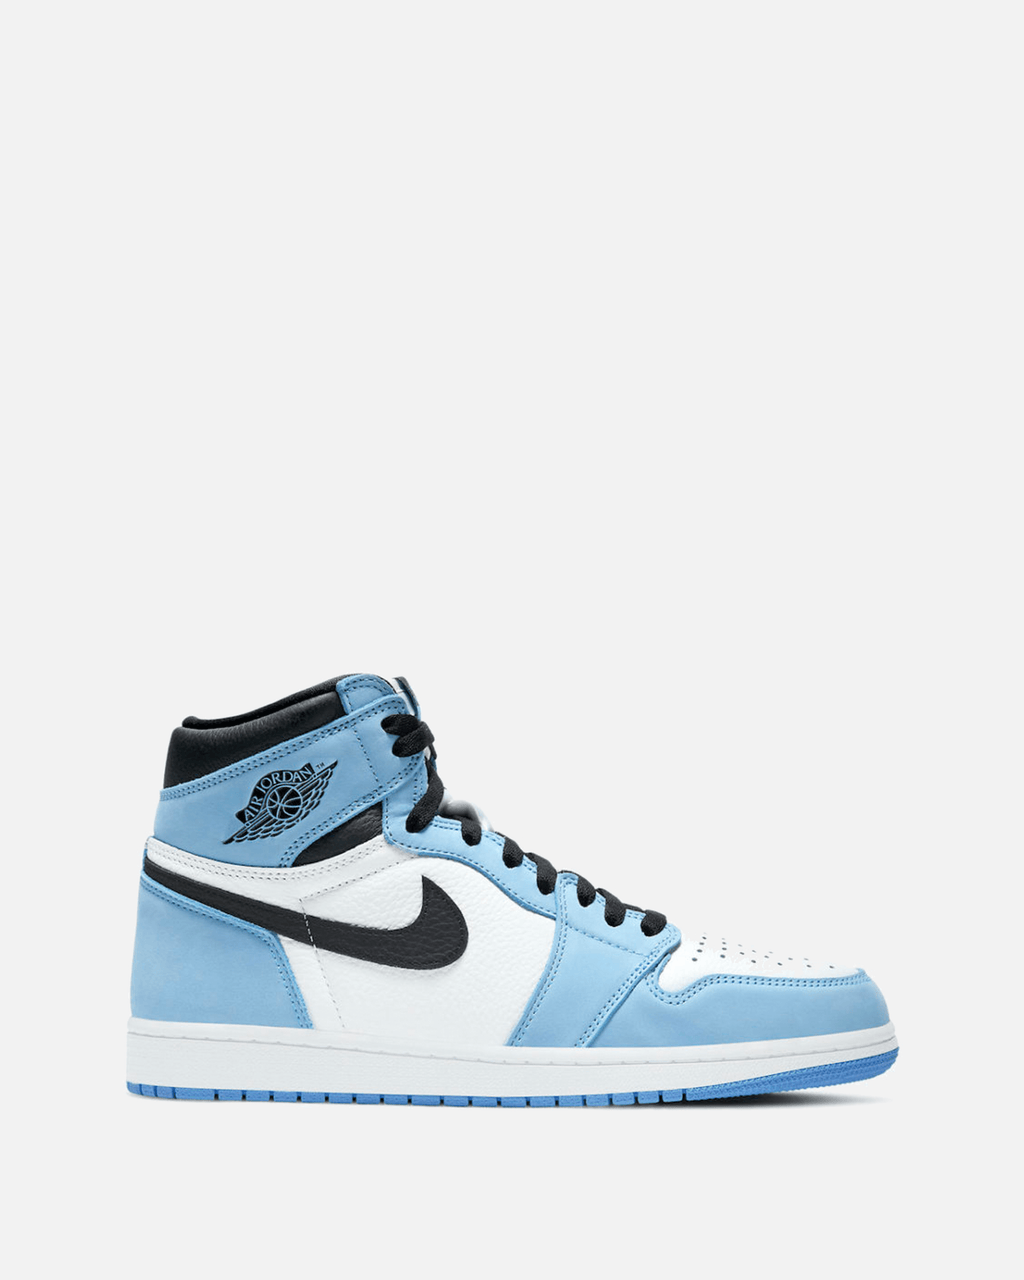 how much are the university blue jordan 1